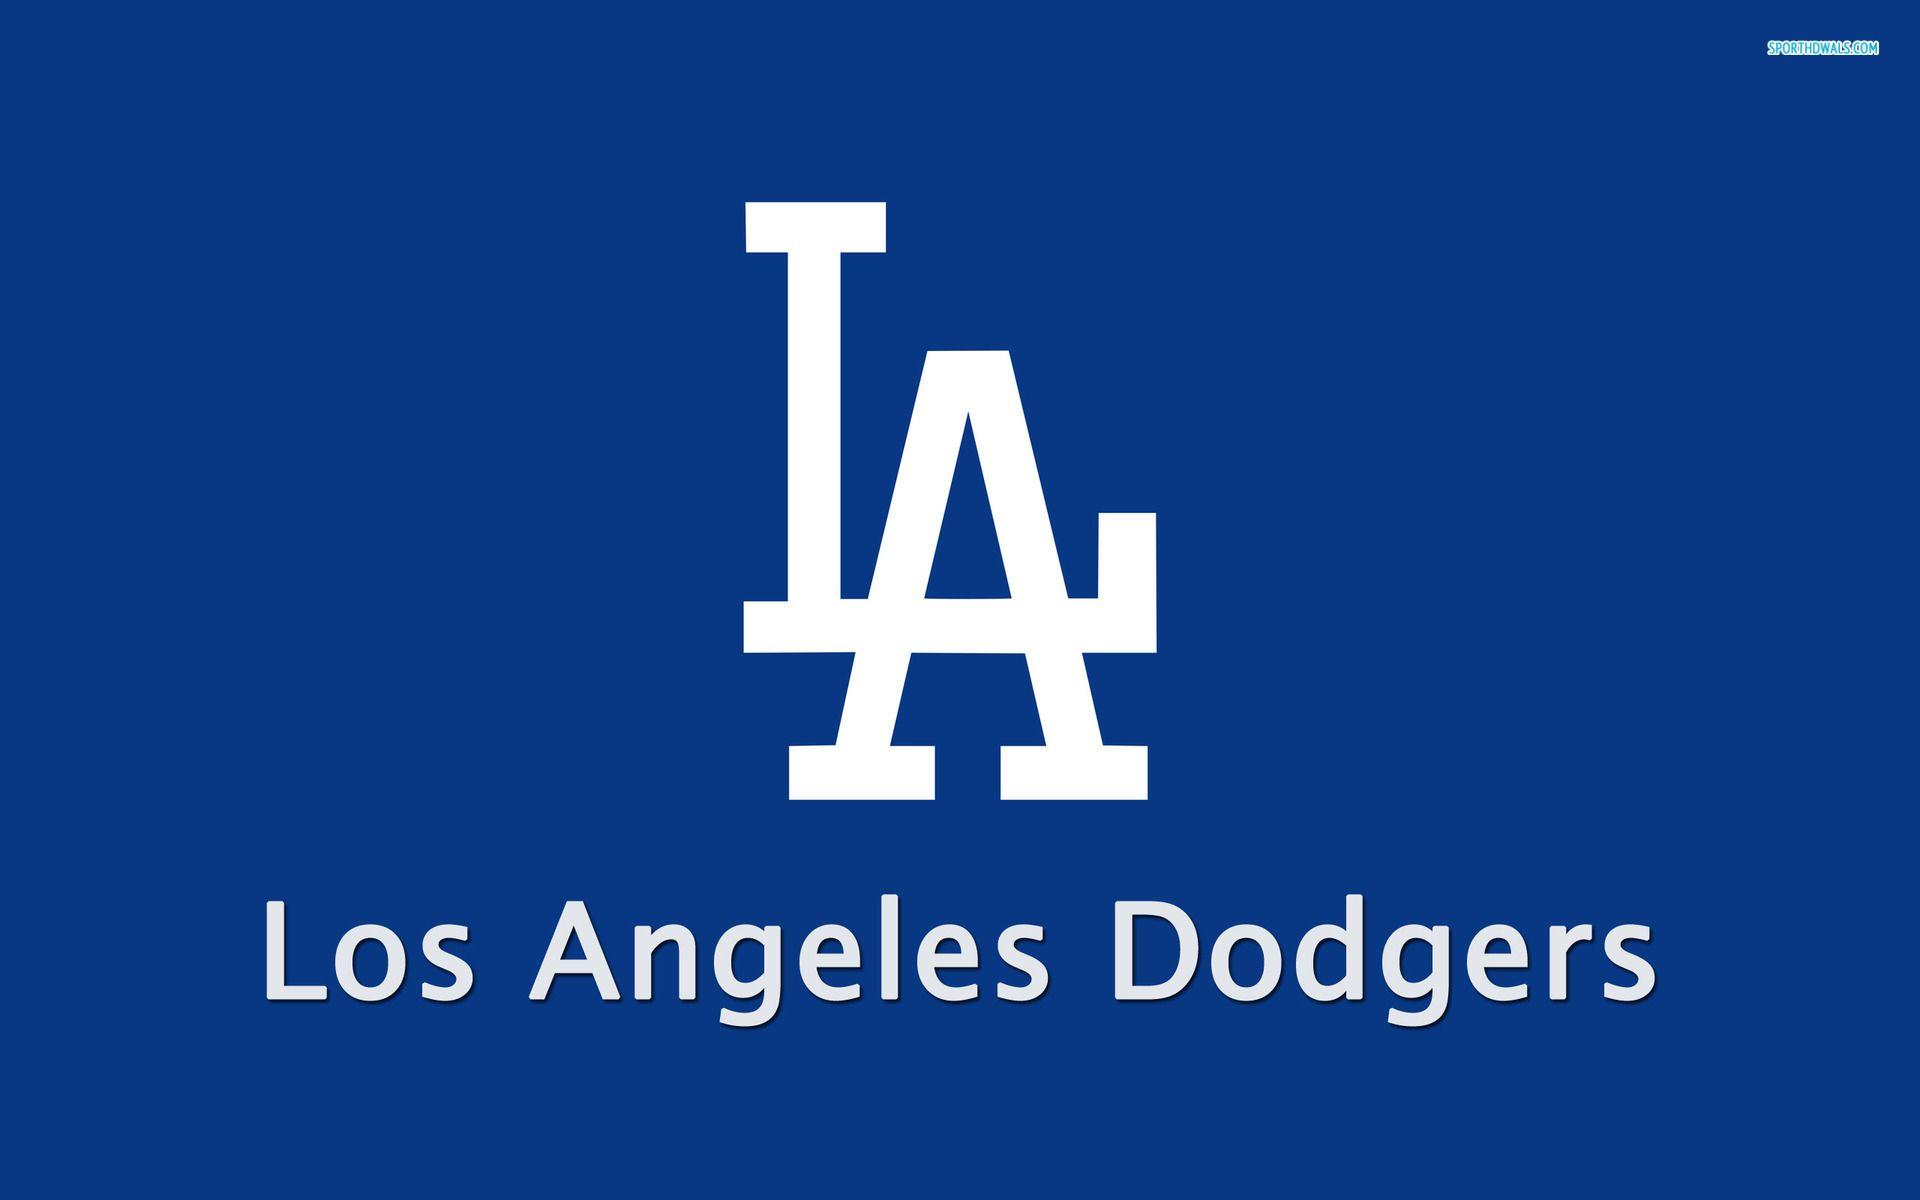 Los Angeles Dodgers wallpapers